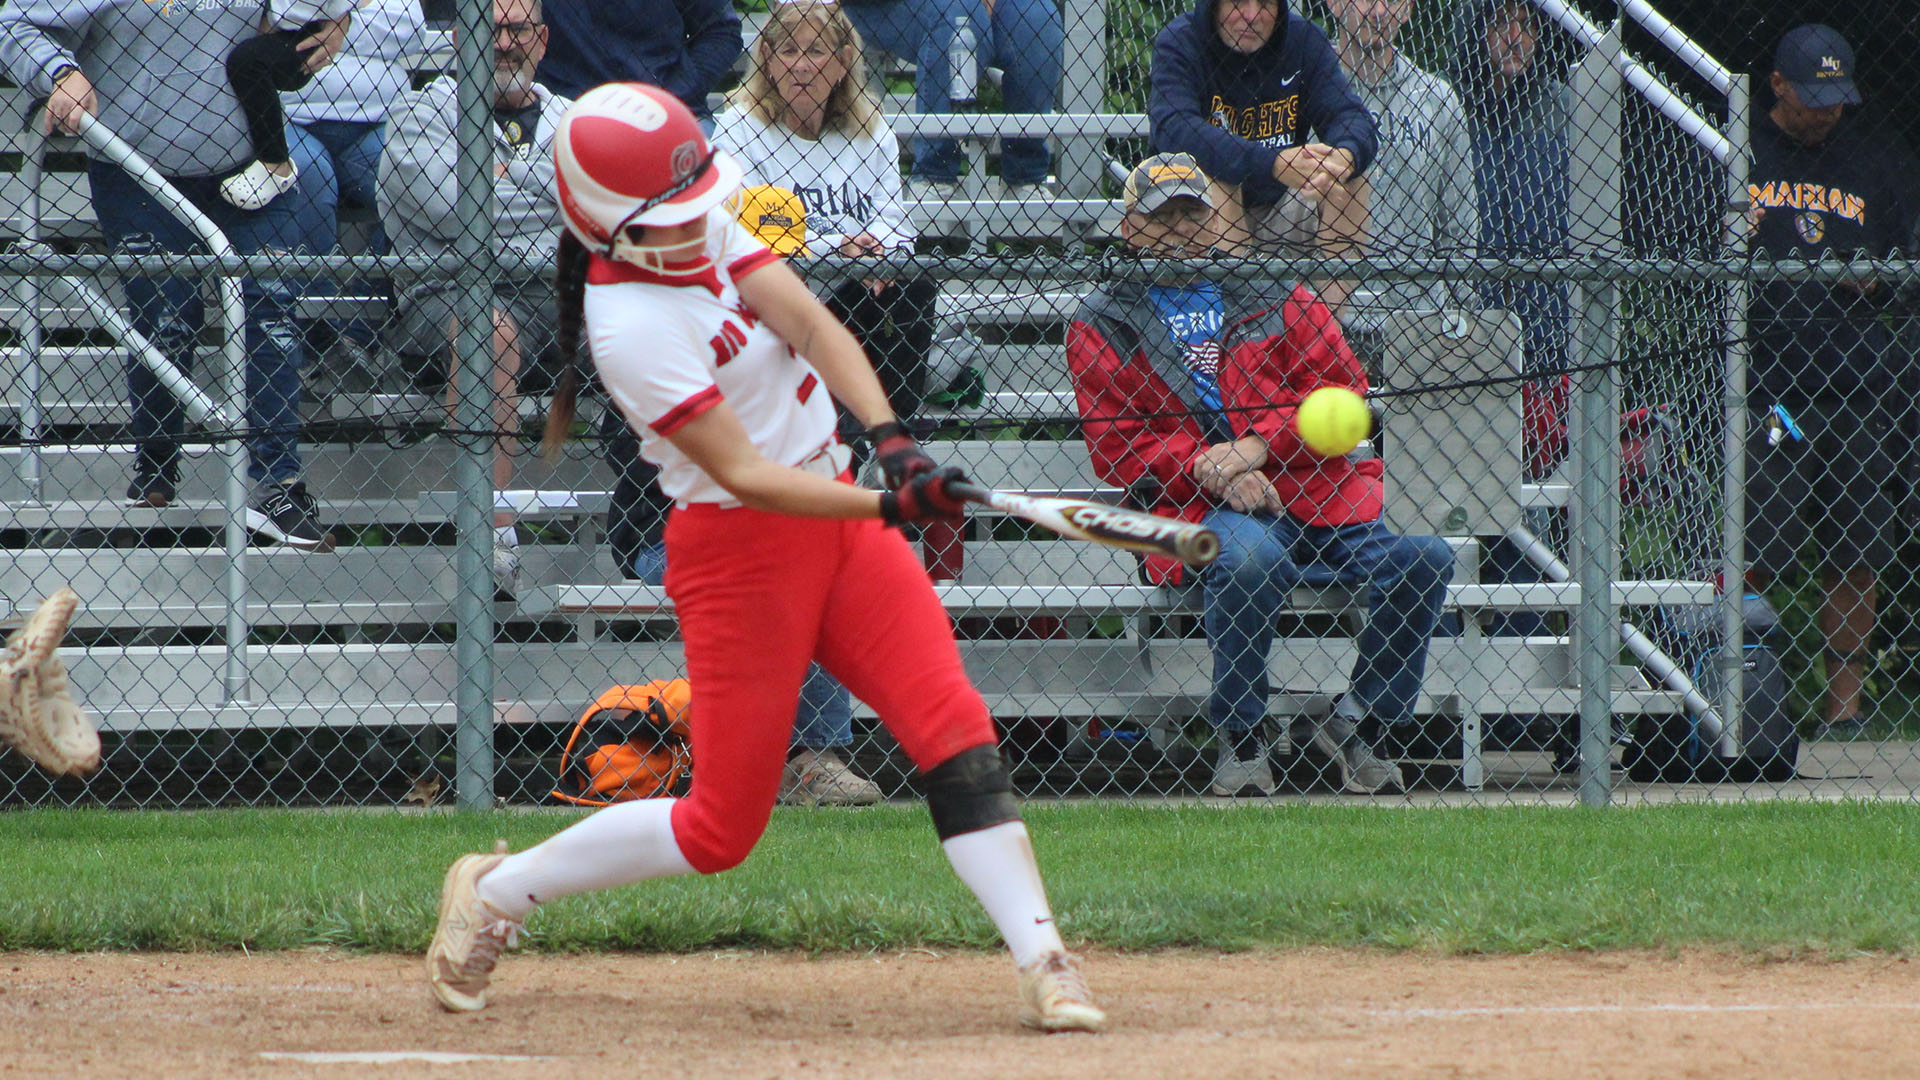 Caitlyn Brisker had one of the two hits for the RedStorm in their season-ending loss to Aquinas on Thursday in the NAIA Softball National Championship Opening Round.